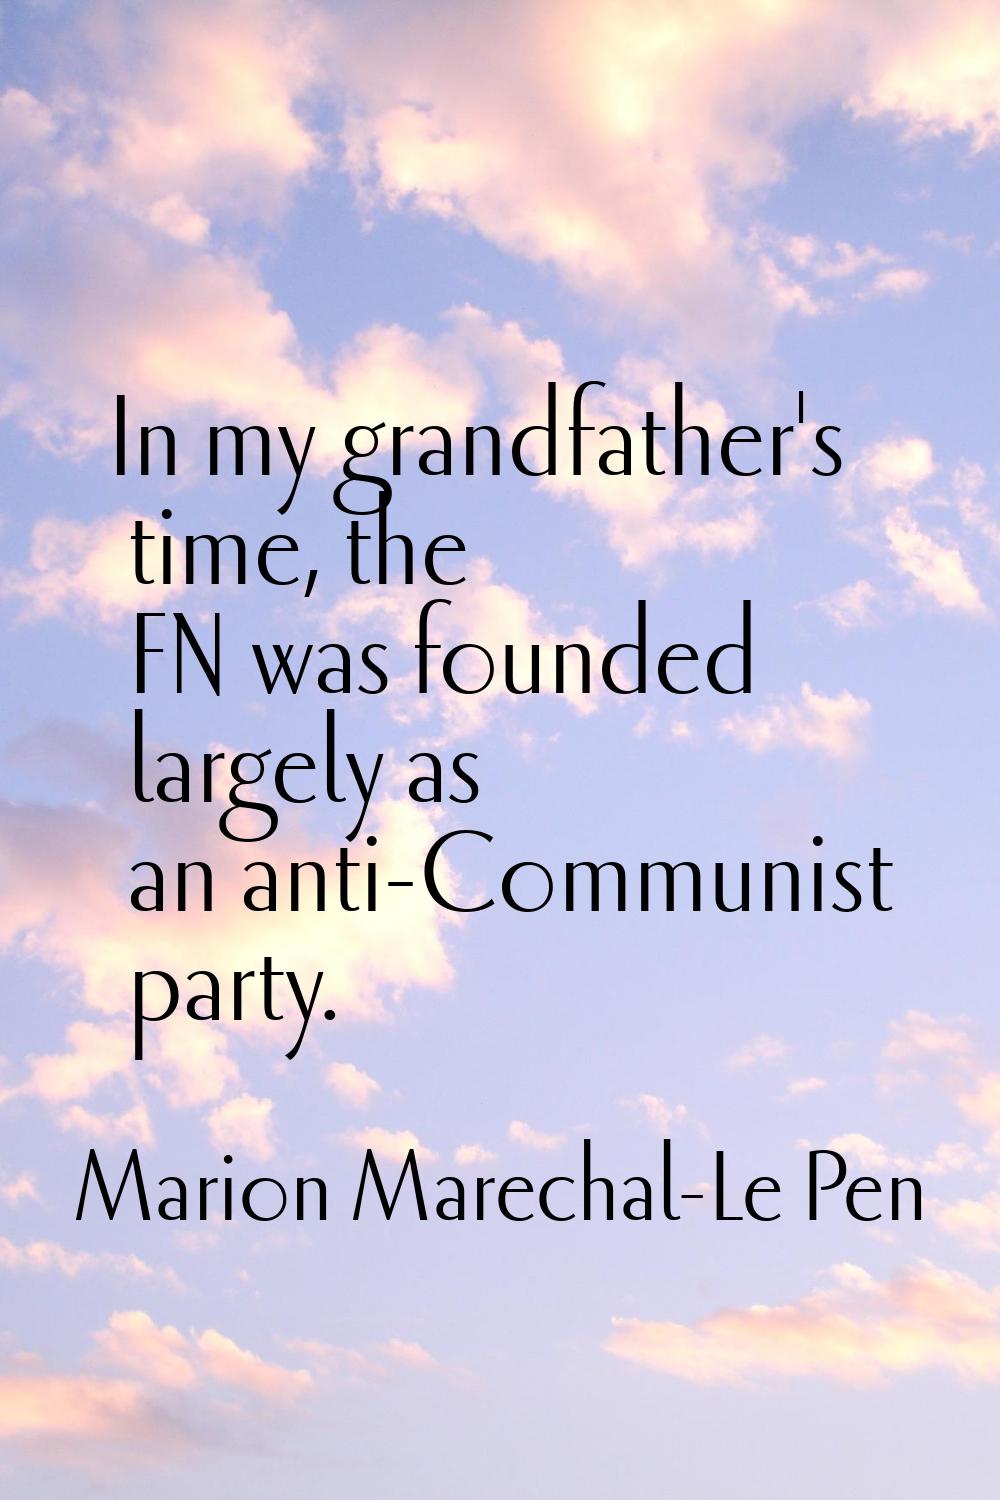 In my grandfather's time, the FN was founded largely as an anti-Communist party.